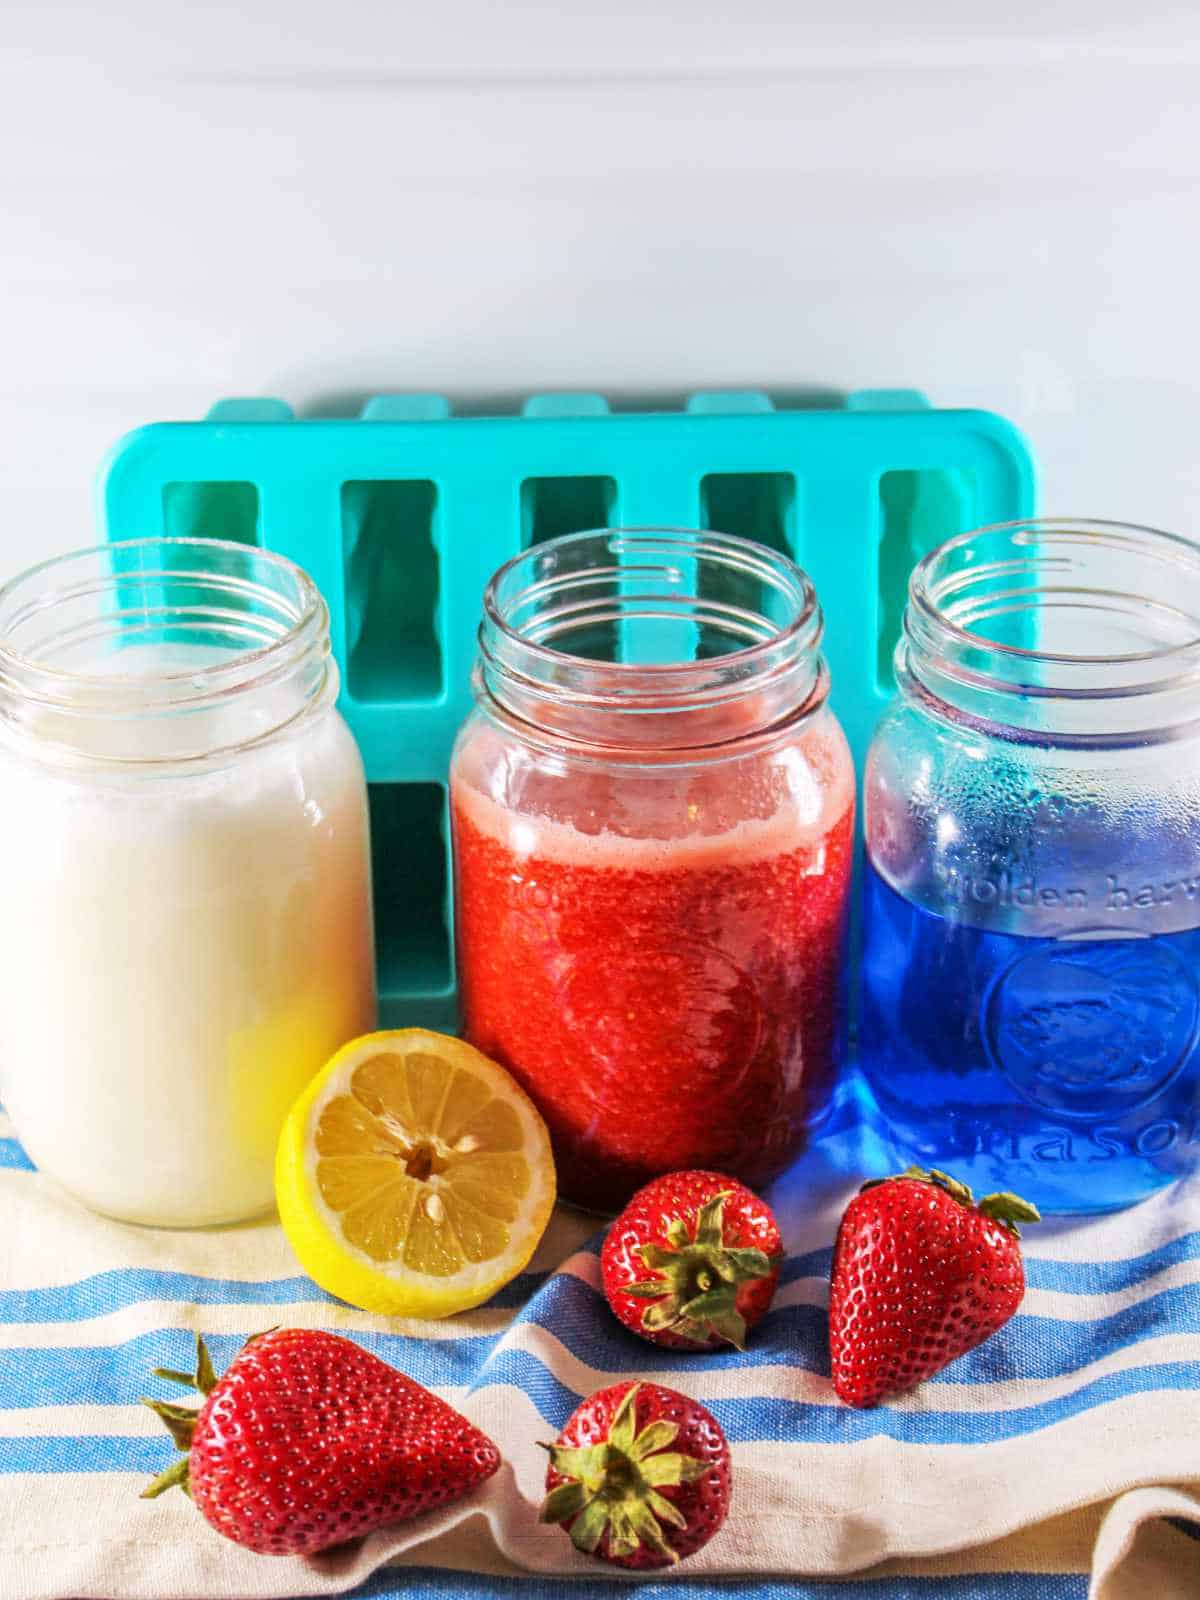 jars with coconut cream, strawberry puree, and blue raspberry jello with popsicle mold nearby.